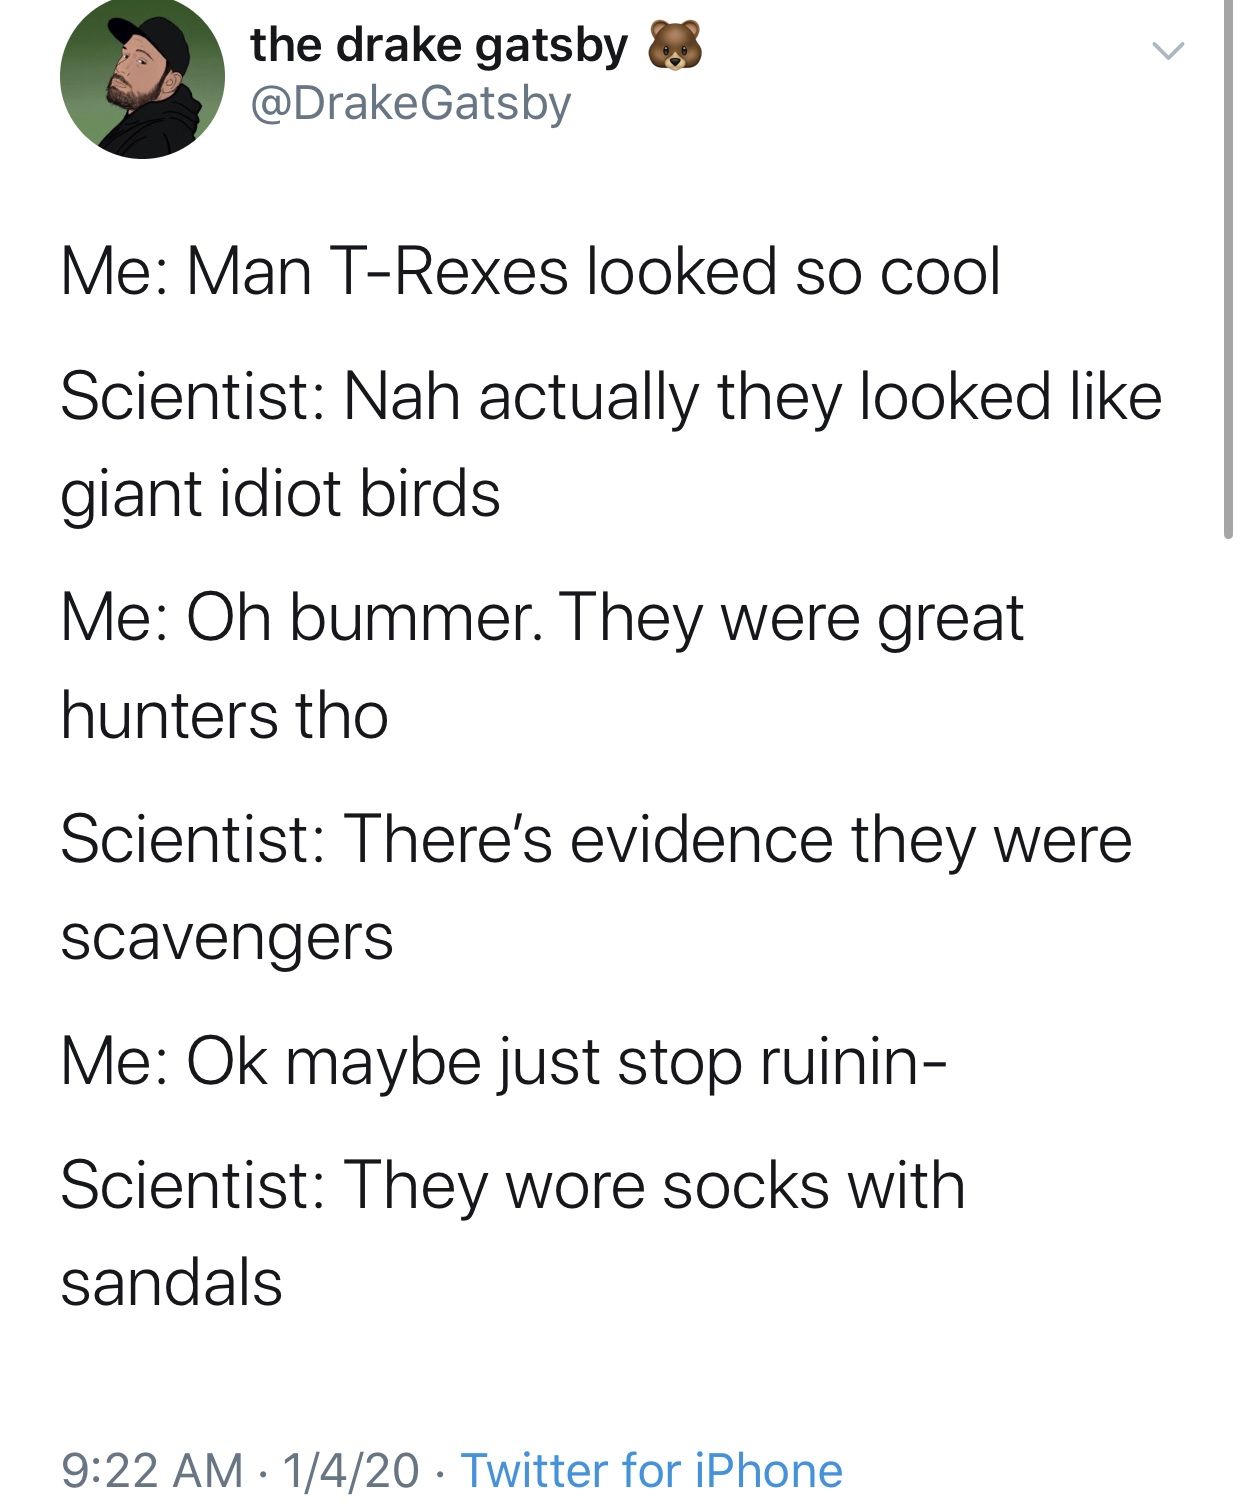 cool pics and memes - the drake gatsby Me Man TRexes looked so cool Scientist Nah actually they looked giant idiot birds Me Oh bummer. They were great hunters tho Scientist There's evidence they were scavengers Me Ok maybe just stop ruinin Scientist They 